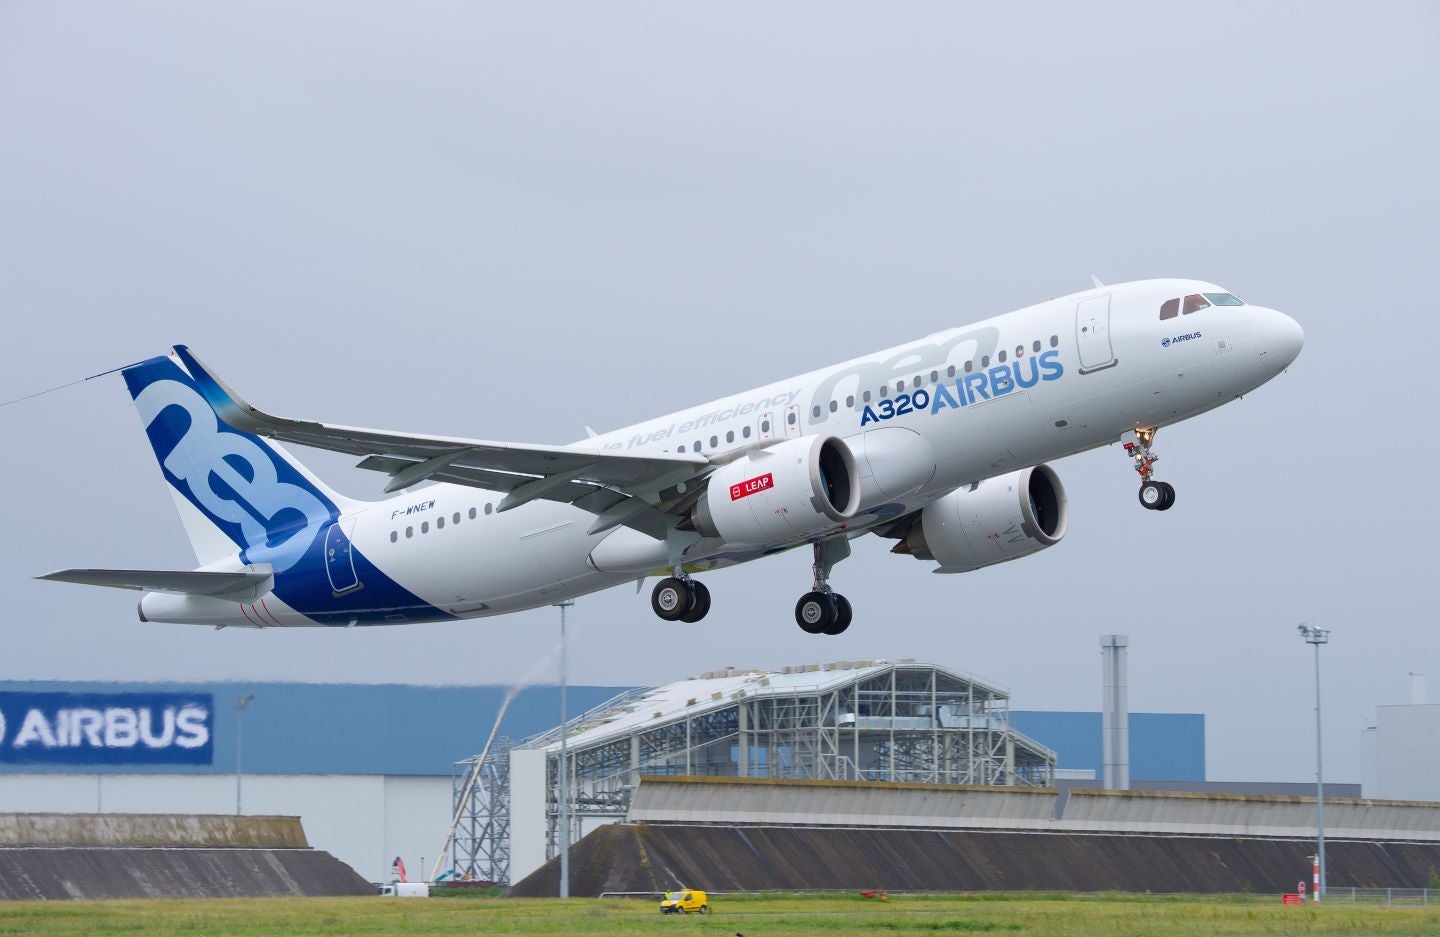 BOC Aviation announces purchase of six Airbus aircraft - Airport Technology